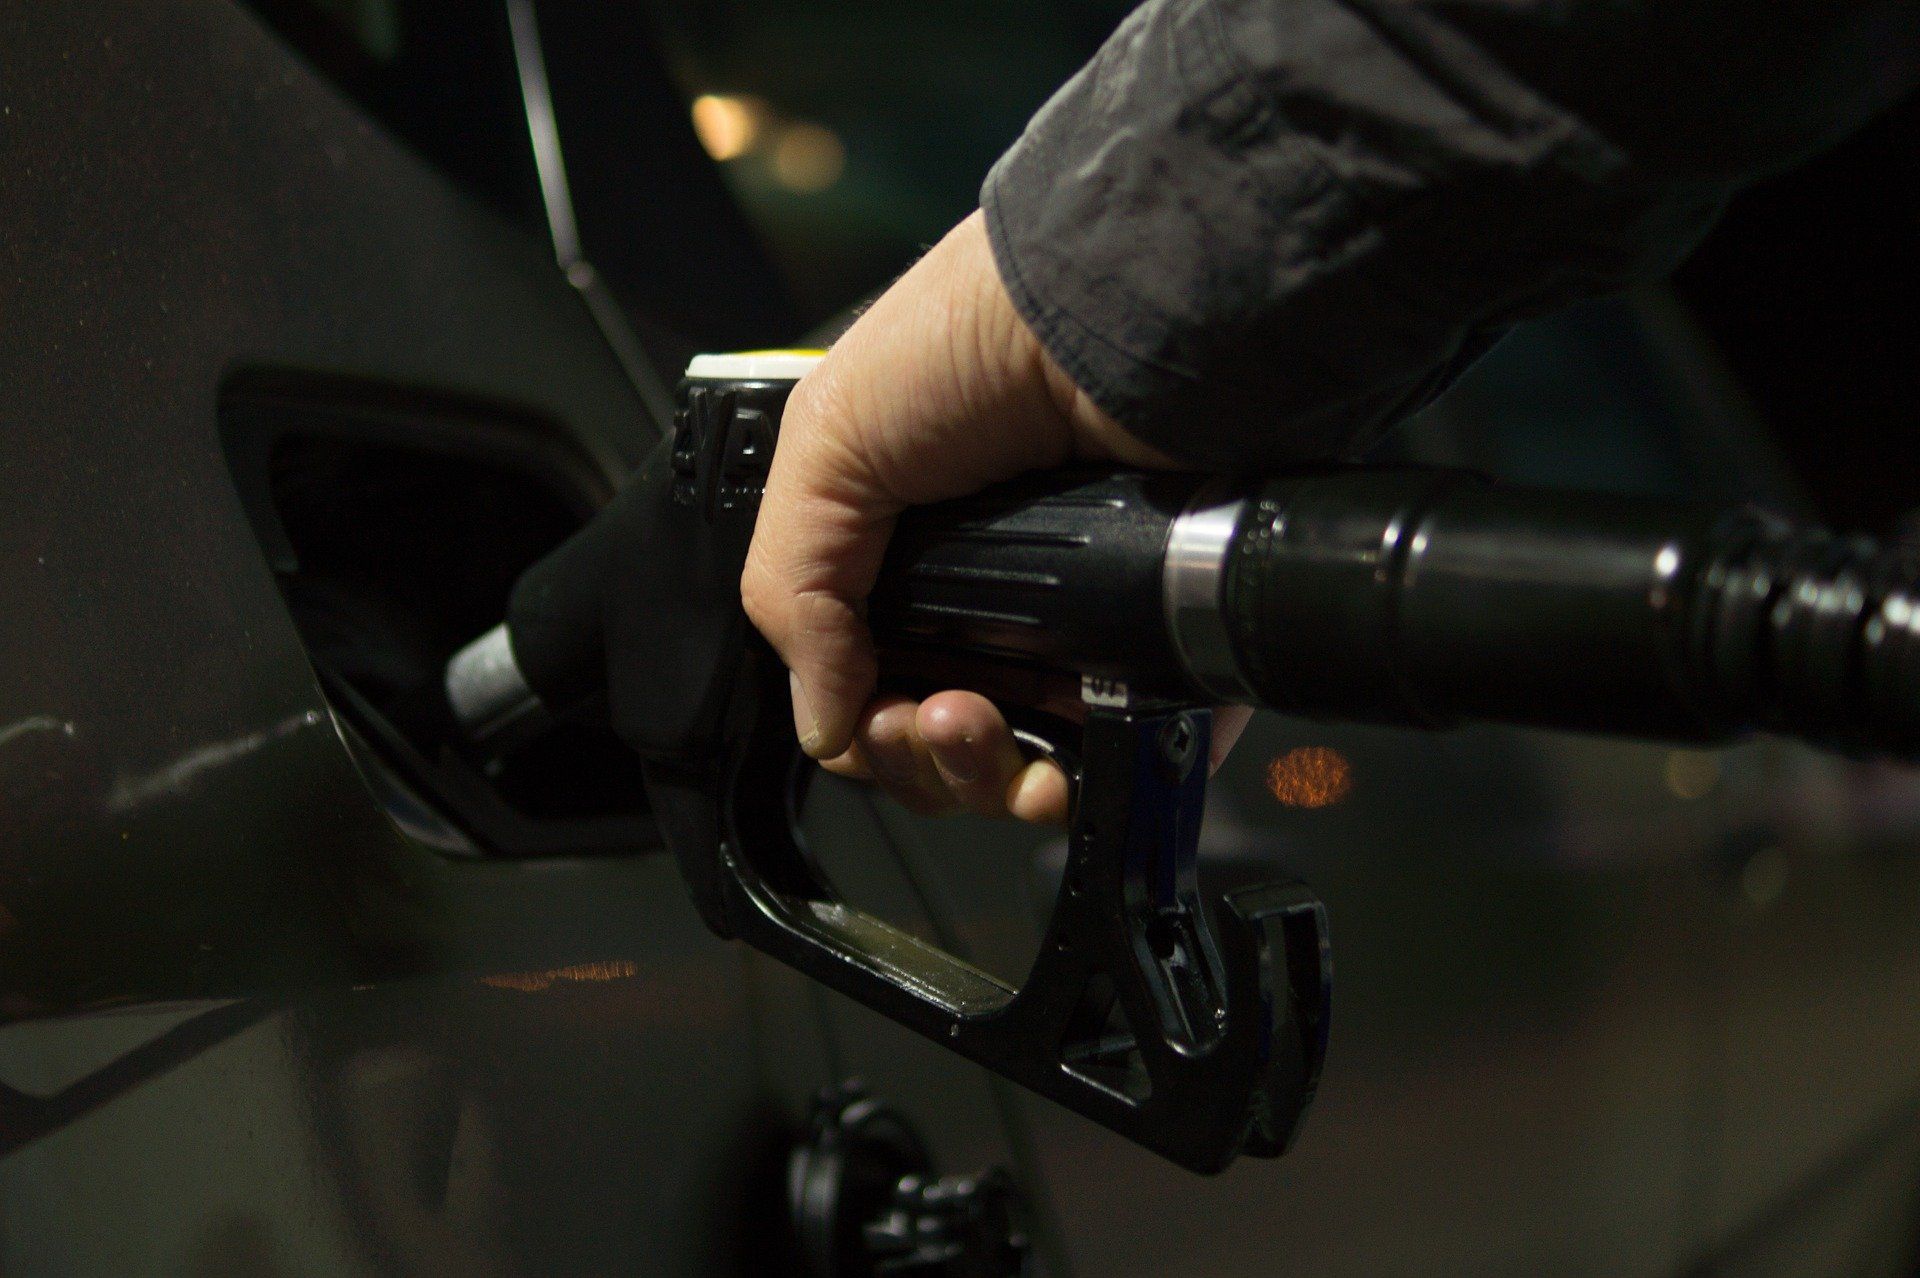 Fuel price today: Petrol and Diesel rates remain unchanged on April 19, 2022